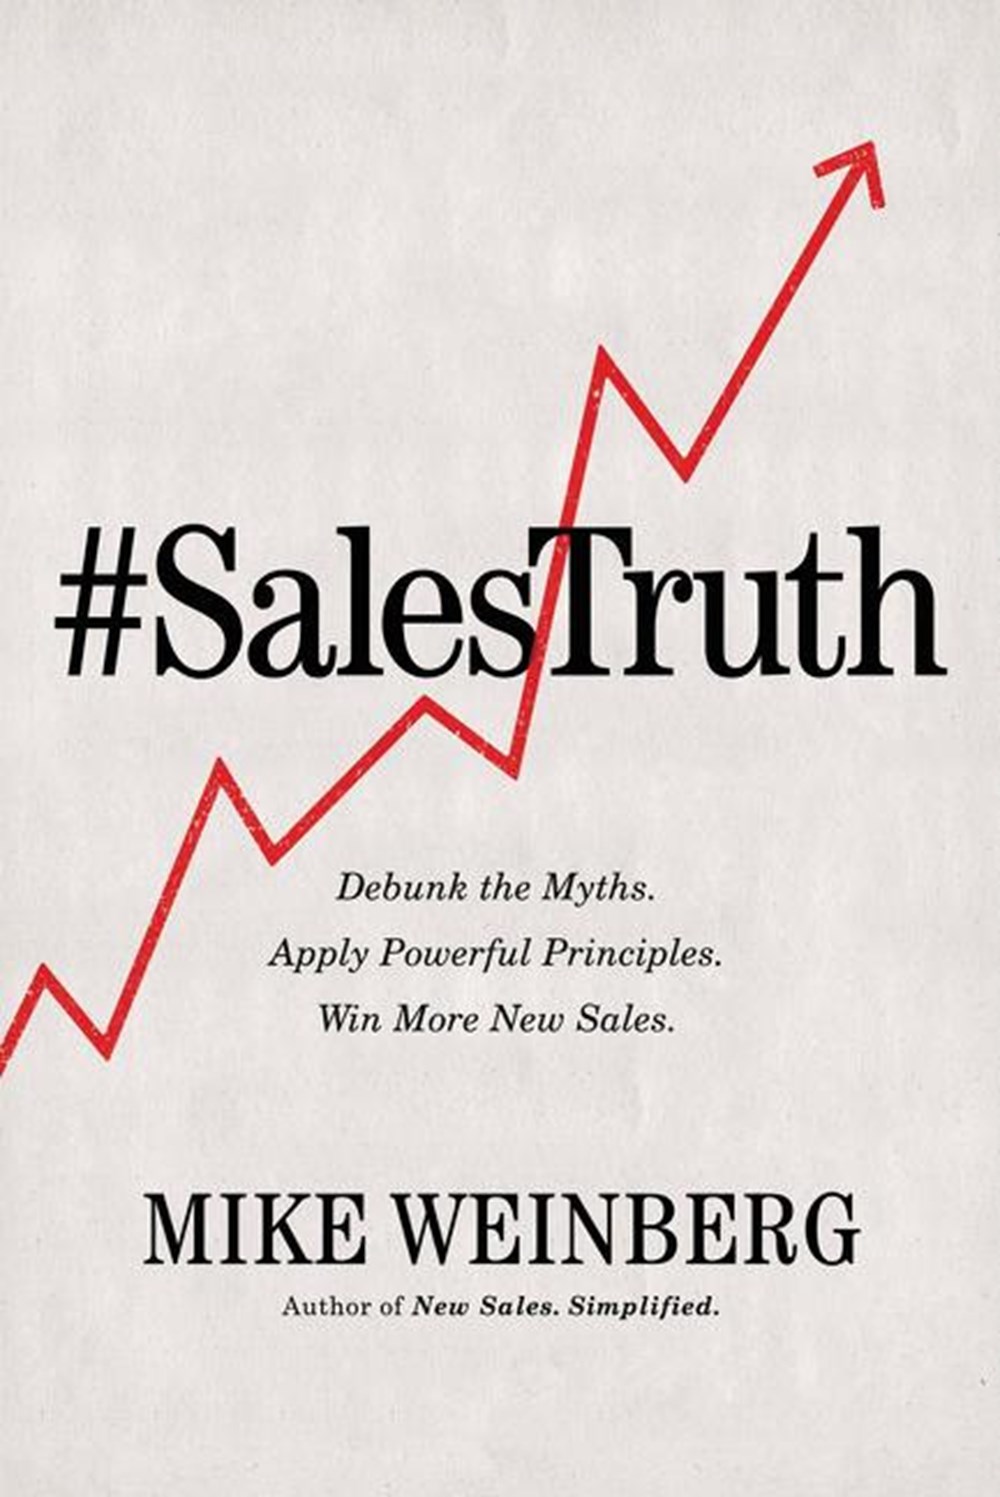 Sales Truth Debunk the Myths. Apply Powerful Principles. Win More New Sales.